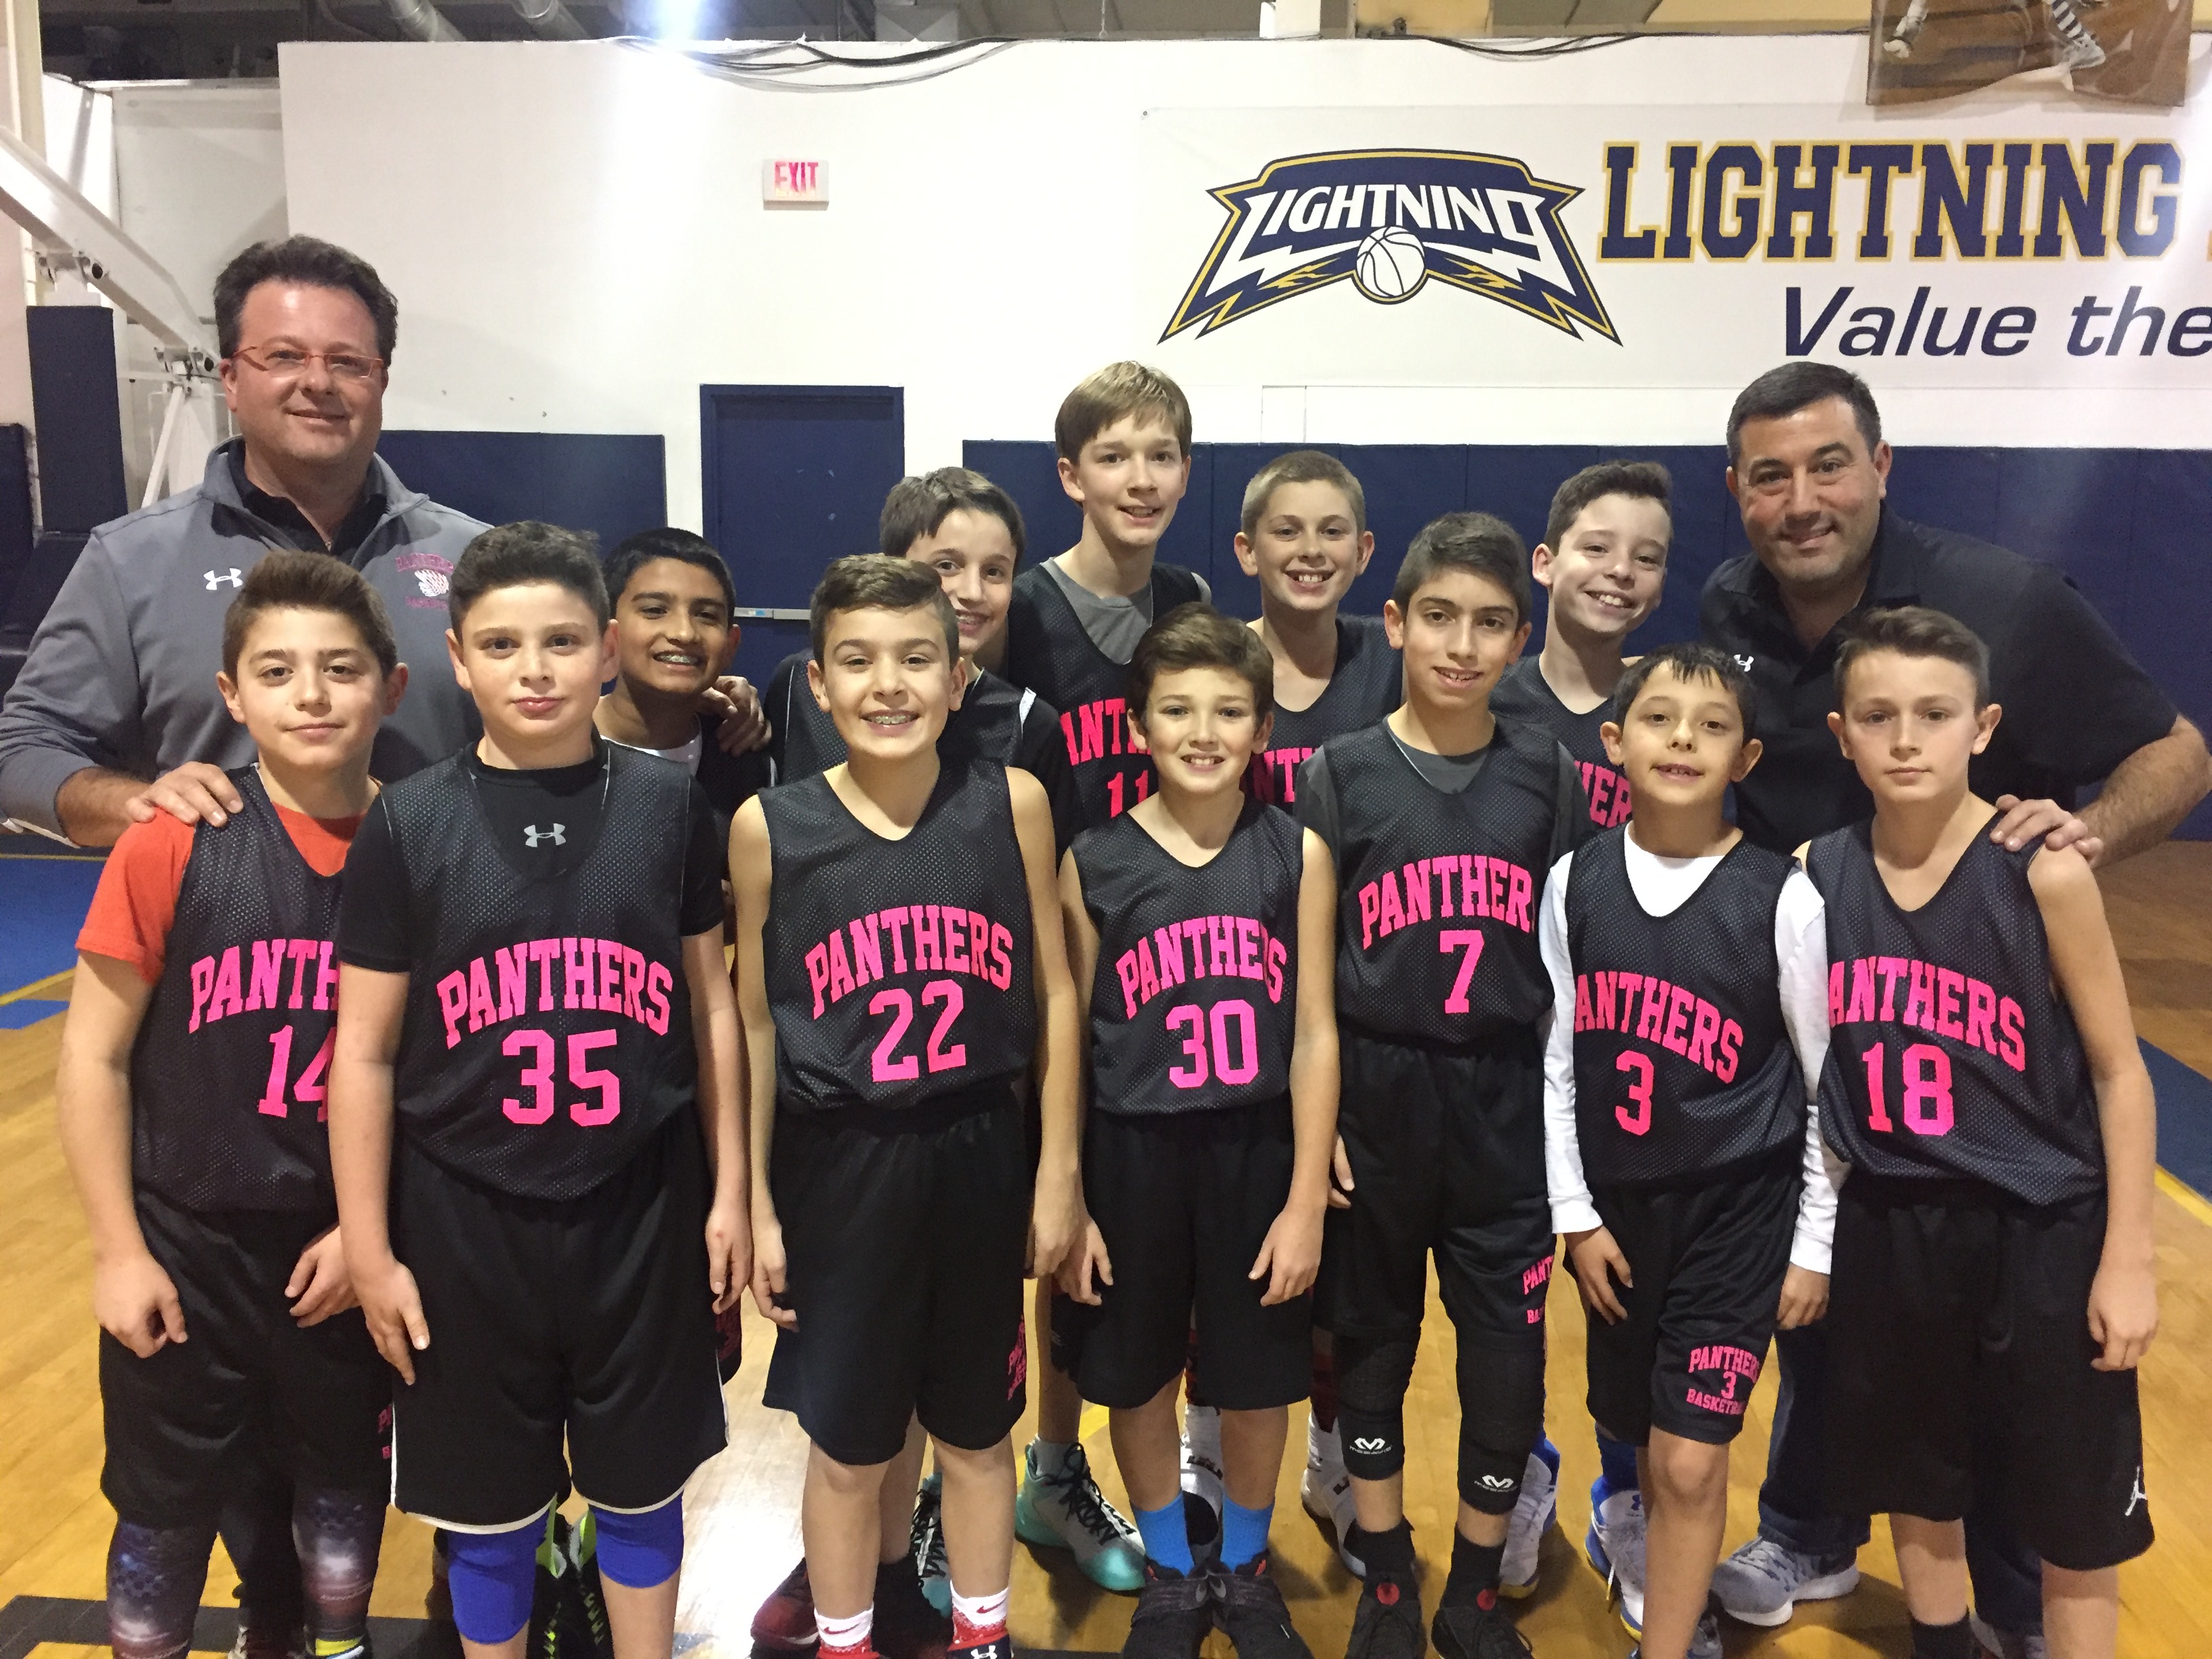 Wheatley Pink Panthers lead pack as underdog team